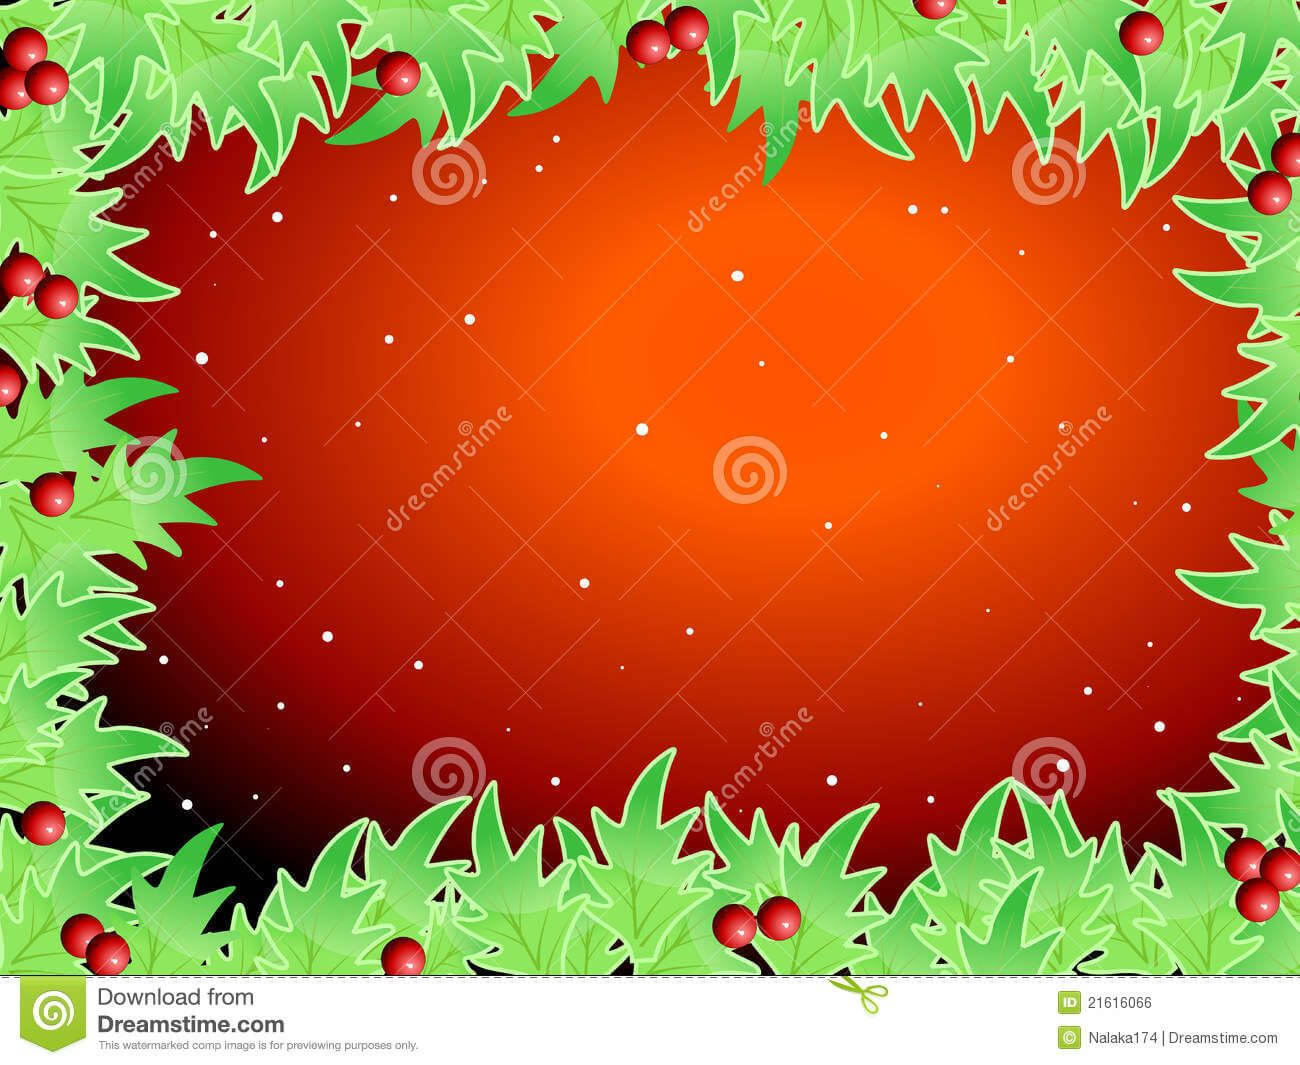 Blank Template For Christmas Greetings Card Royalty Free Within Blank Christmas Card Templates Free